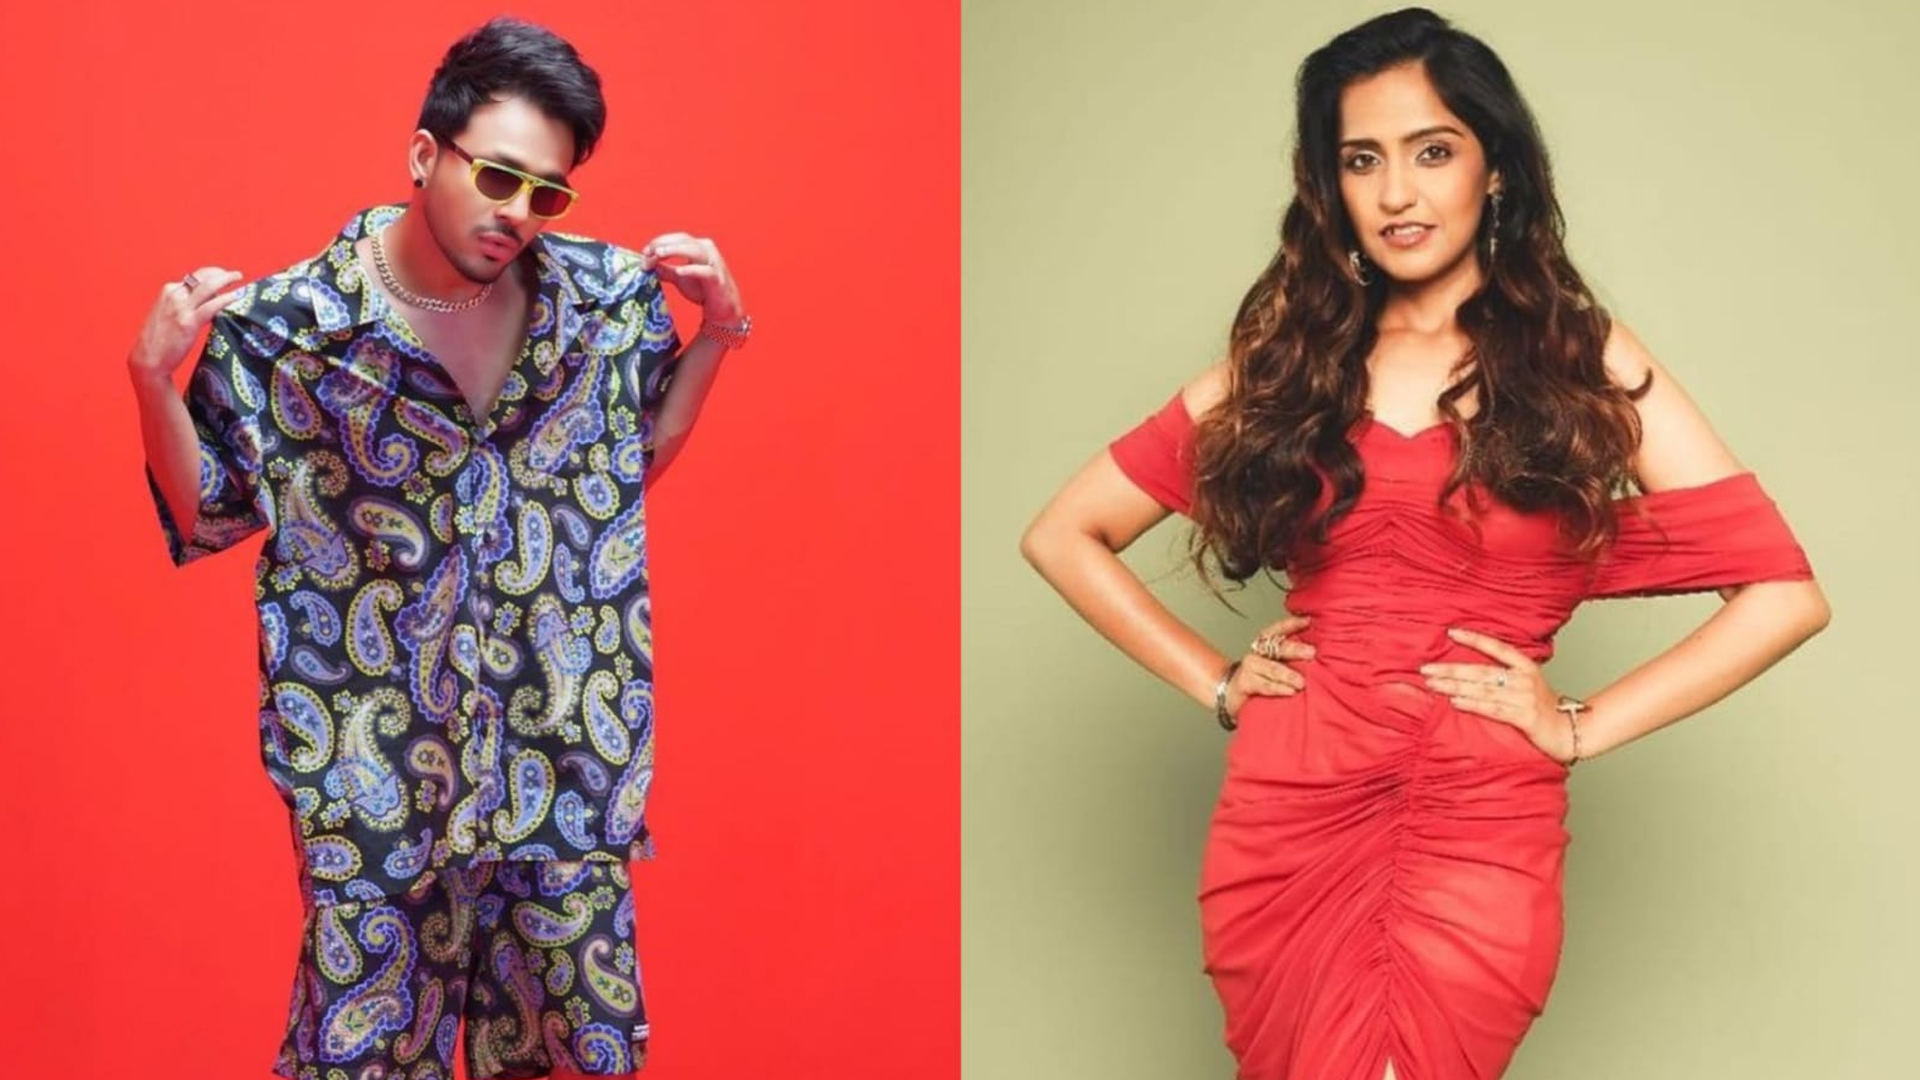 Countdown to BIGG BOSS OTT 2 Finale Begins with Tony Kakkar and Asees Kaur’s Special Performance